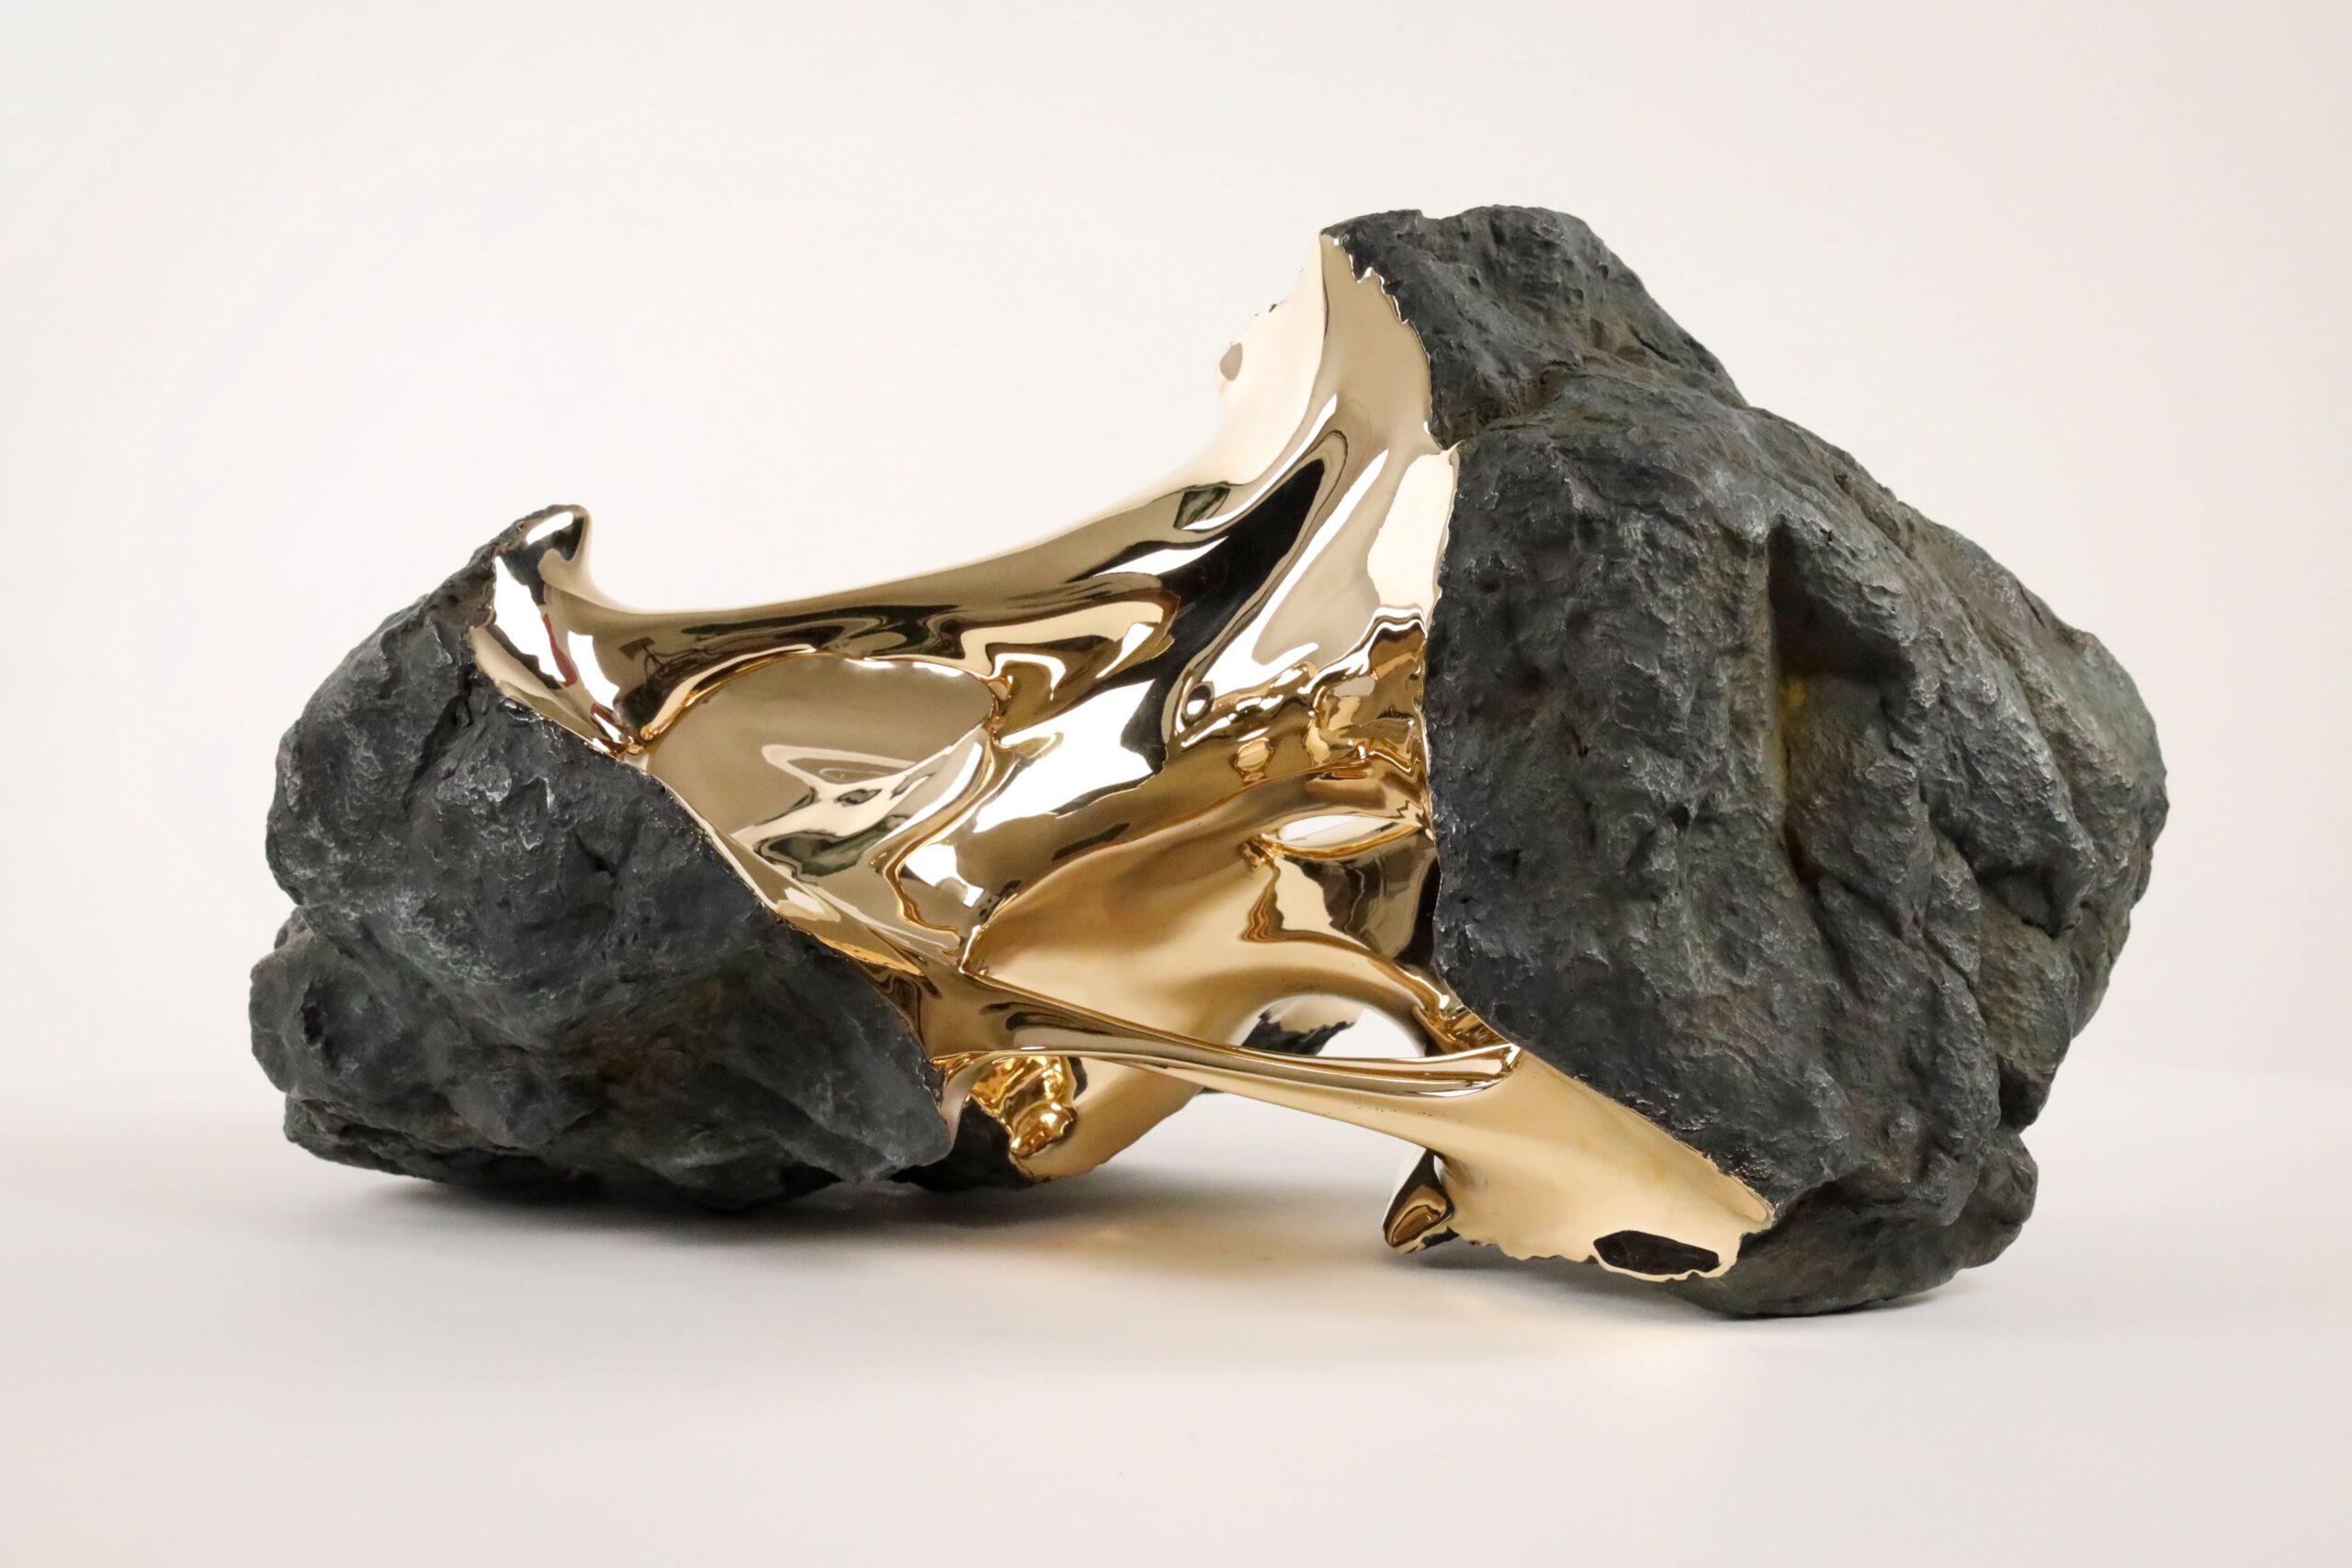 Kairos by Romain Langlois - Rock-like bronze sculpture, golden, abstract For Sale 14